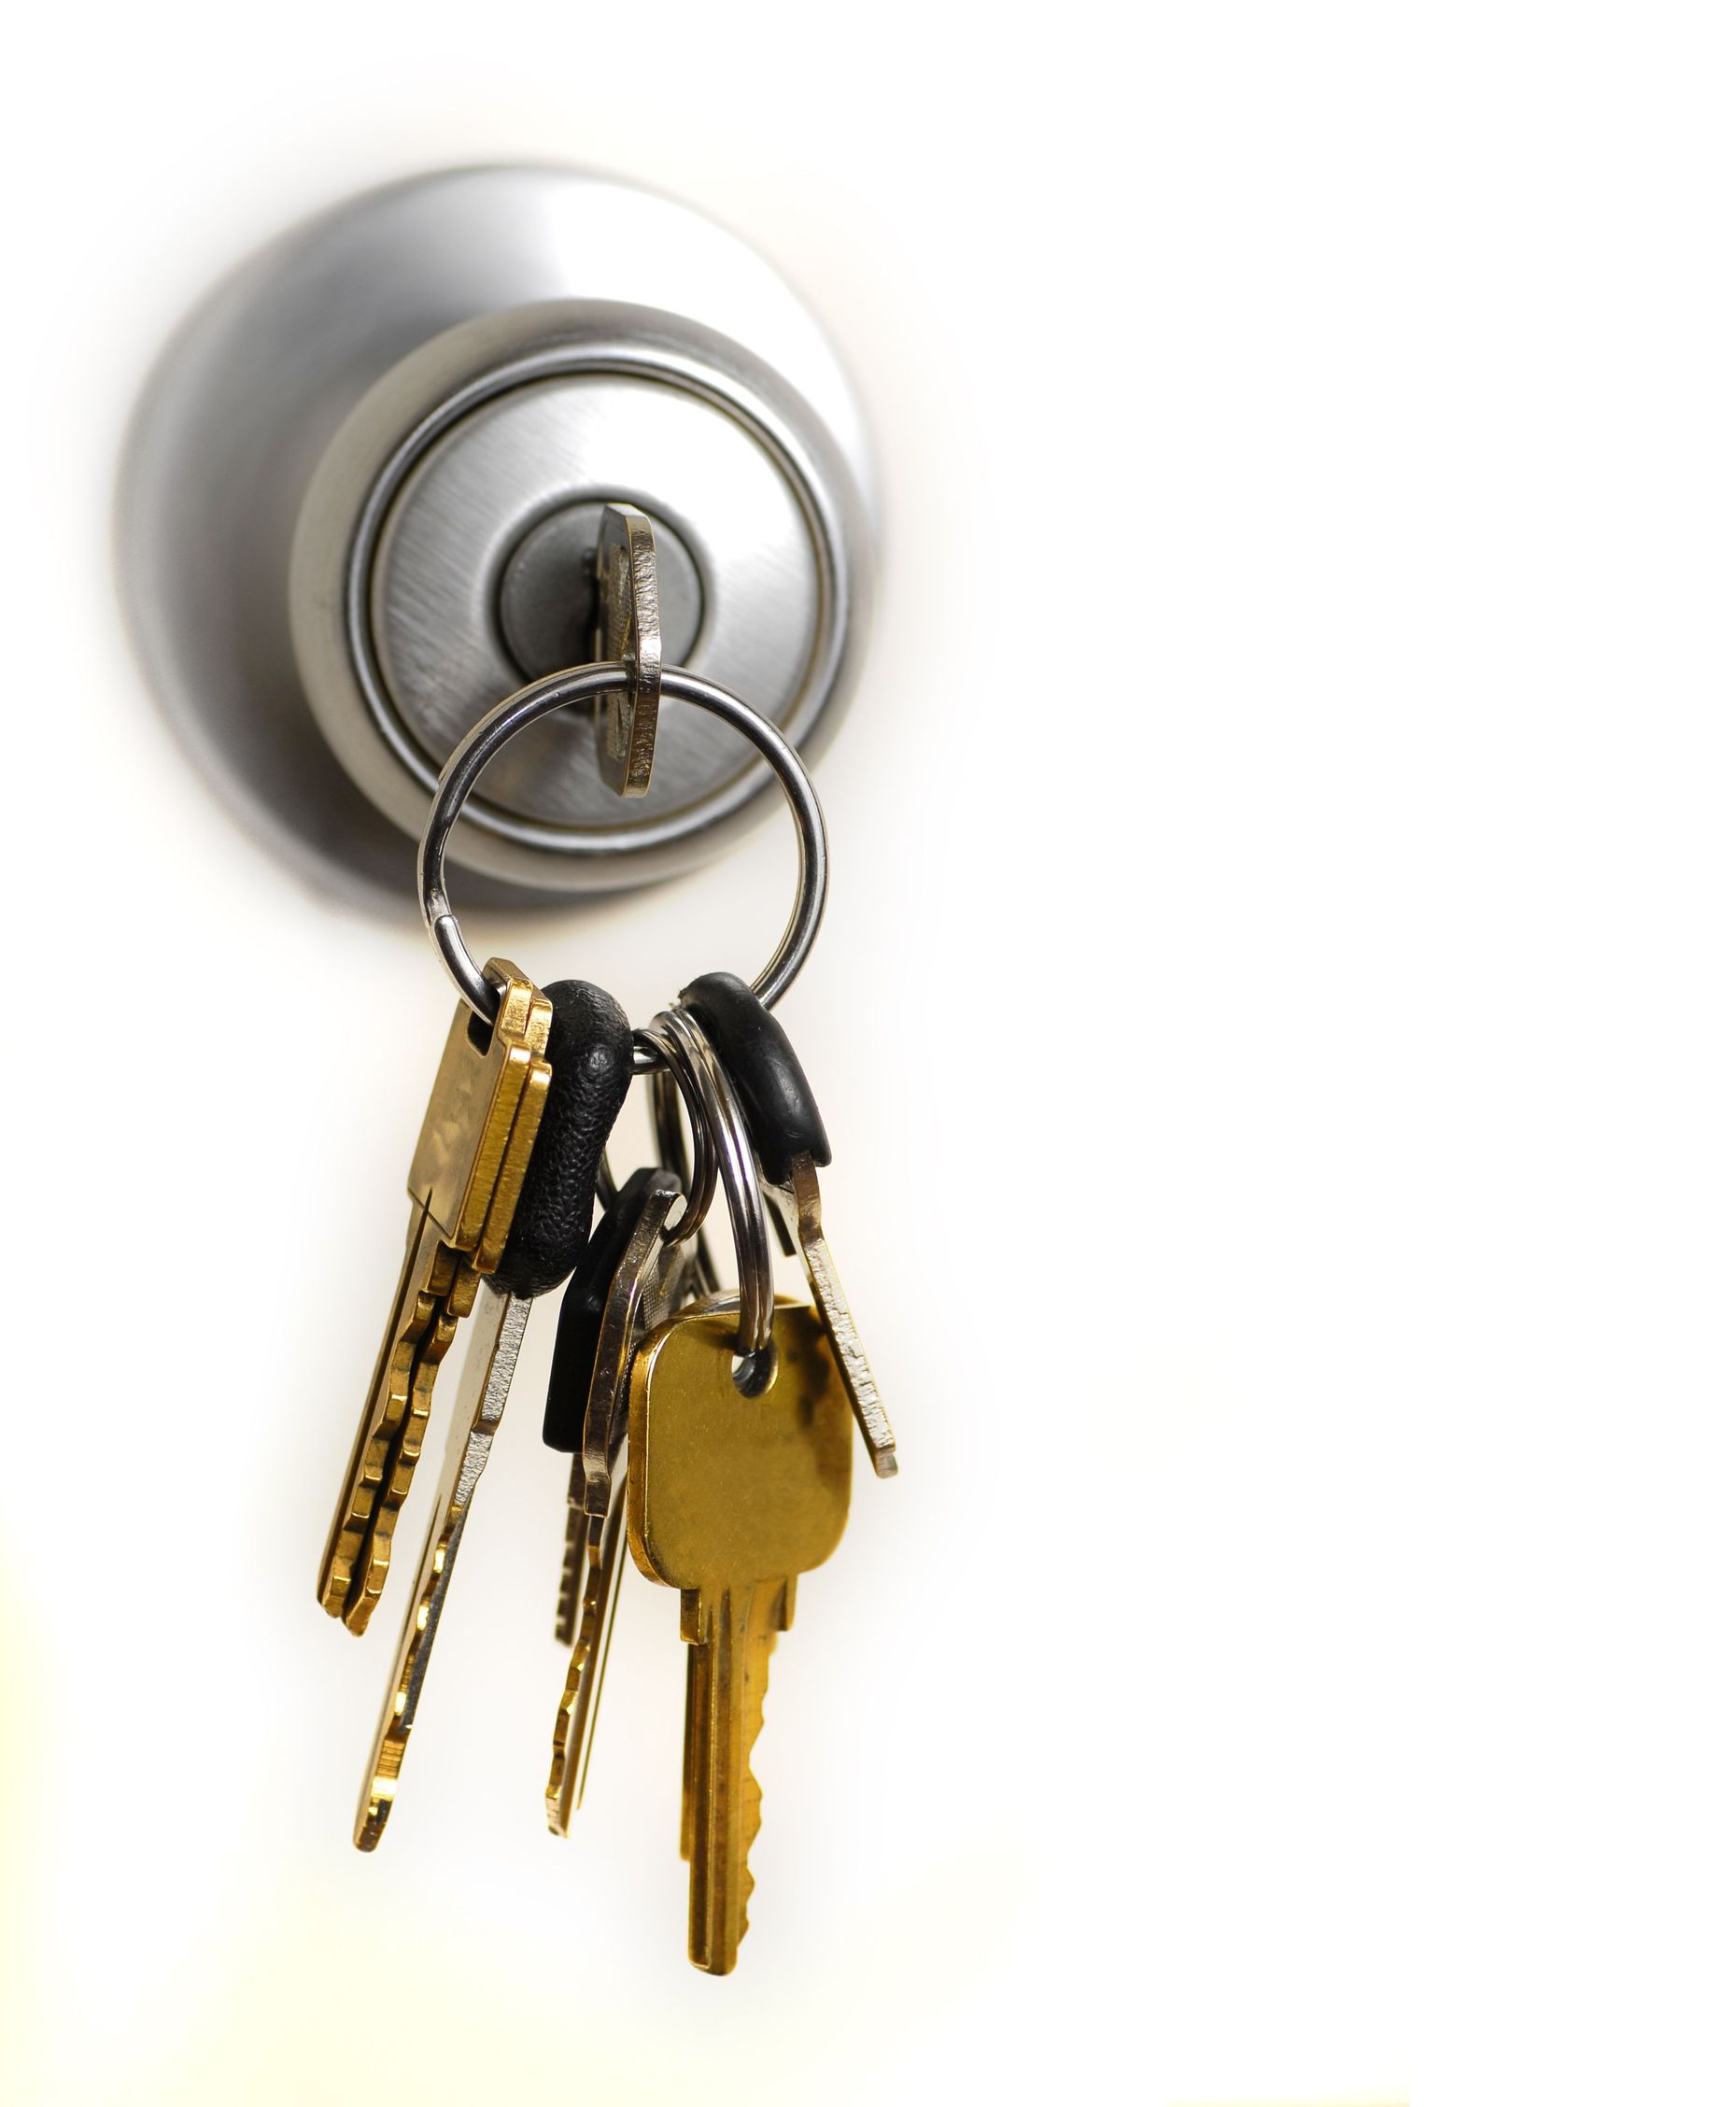 To Make Your Home Safer, Call a Locksmith in Tulsa